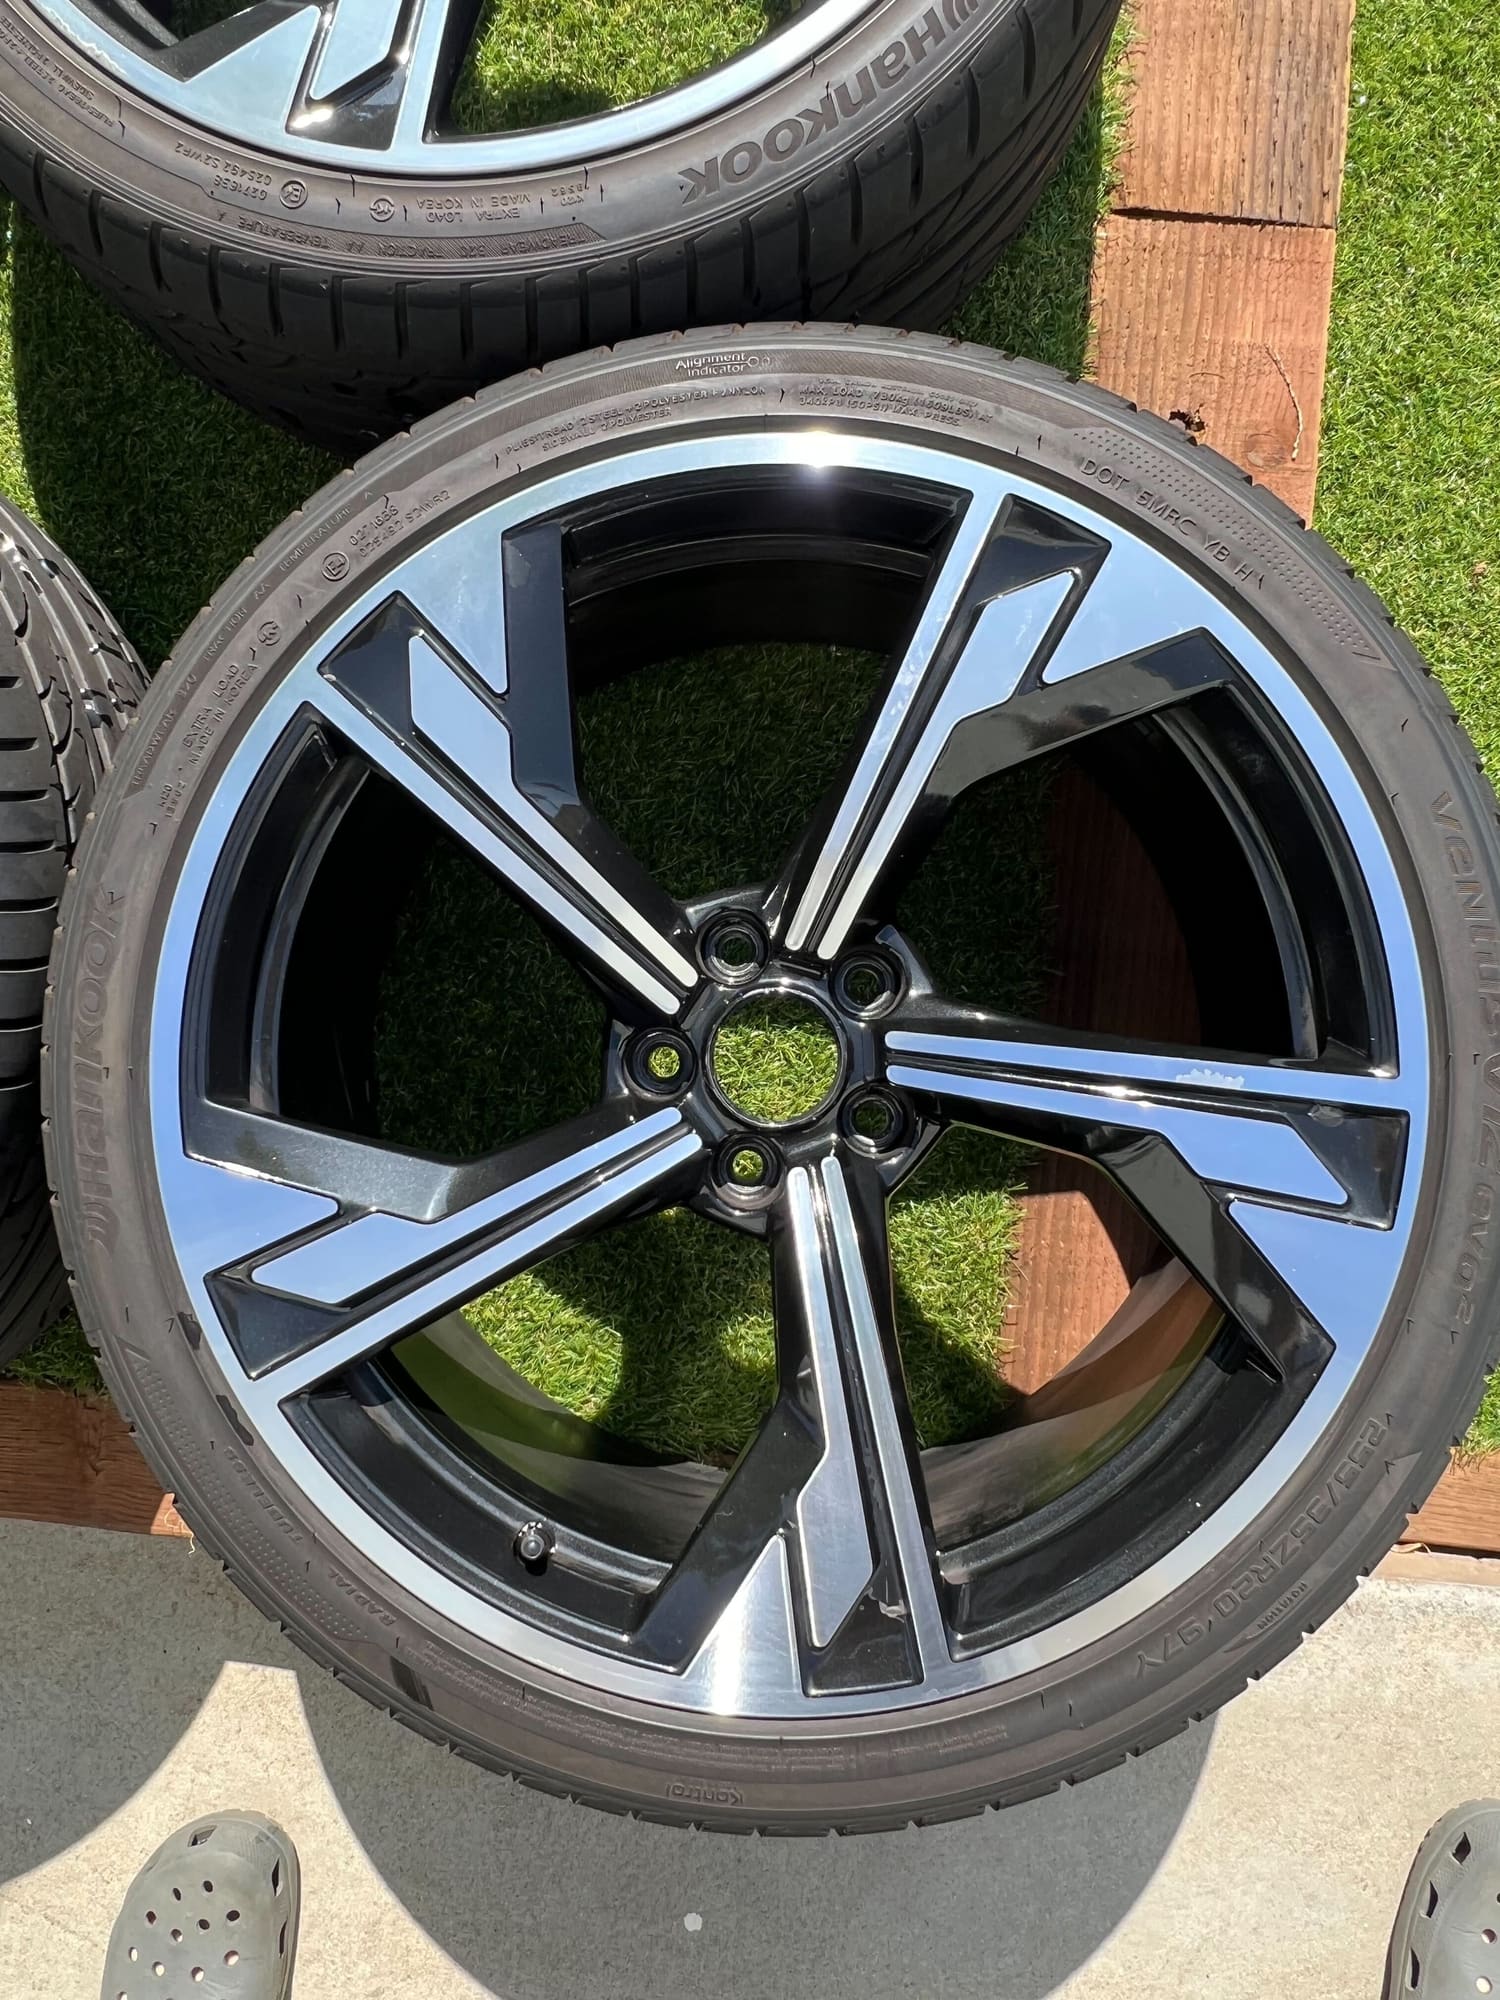 Wheels and Tires/Axles - 20" RS5 5-Arm Flag Sport Wheels - Used - 2017 to 2022 Audi RS5 Sportback - 2017 to 2022 Audi A4 allroad - Los Angeles, CA 90065, United States